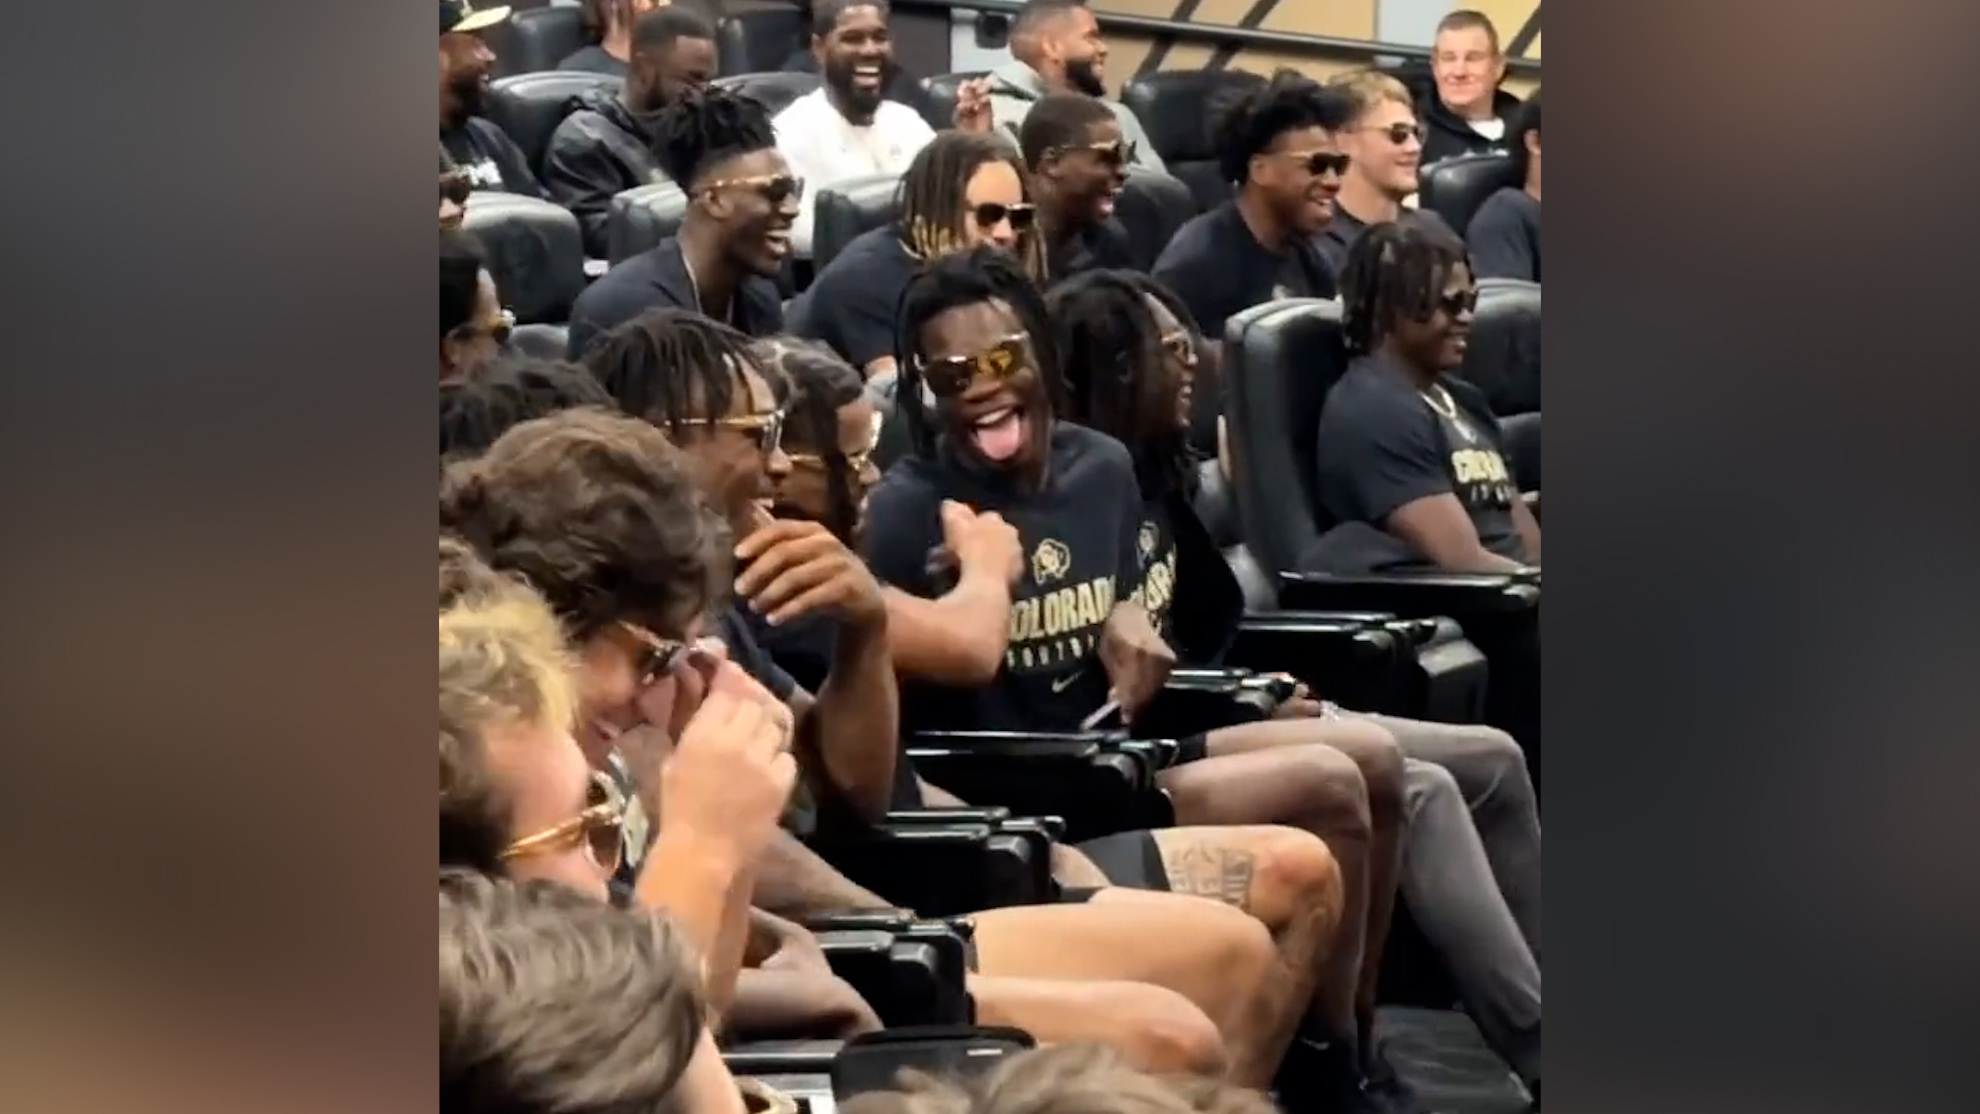 Coach Prime throws shade, gifts sunglasses to entire Colorado state team in style statement